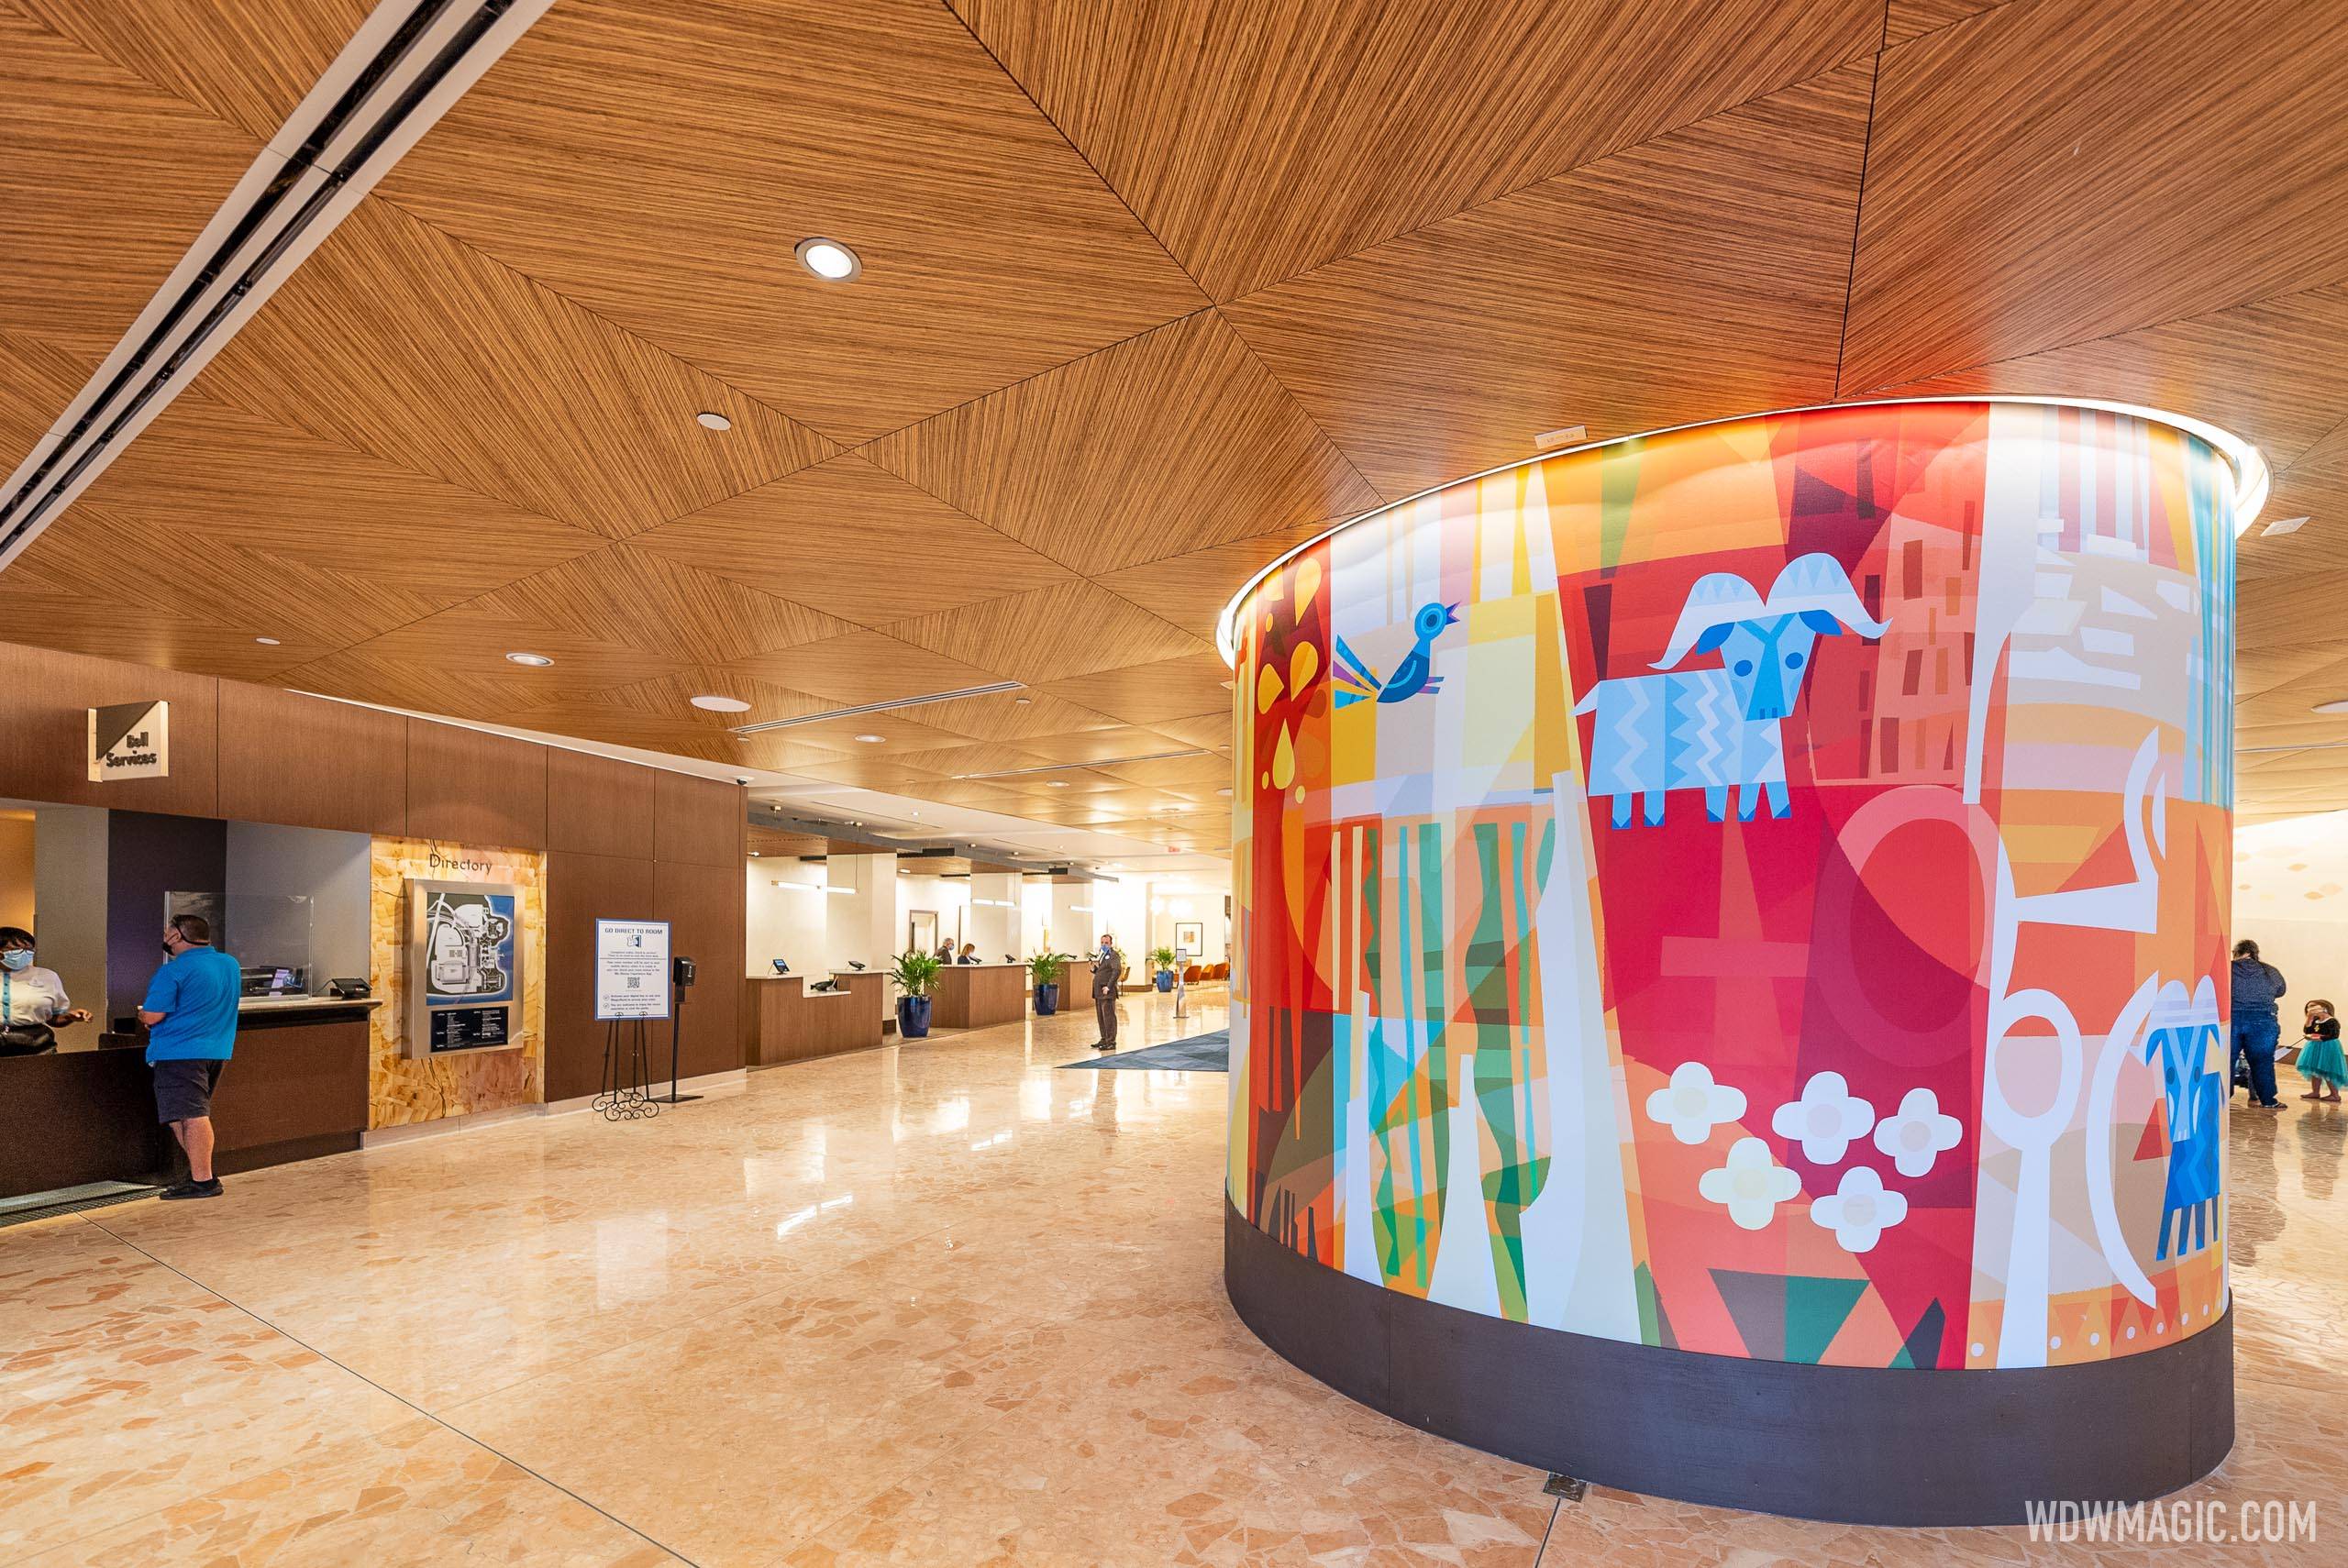 A look at the new Contemporary Resort lobby